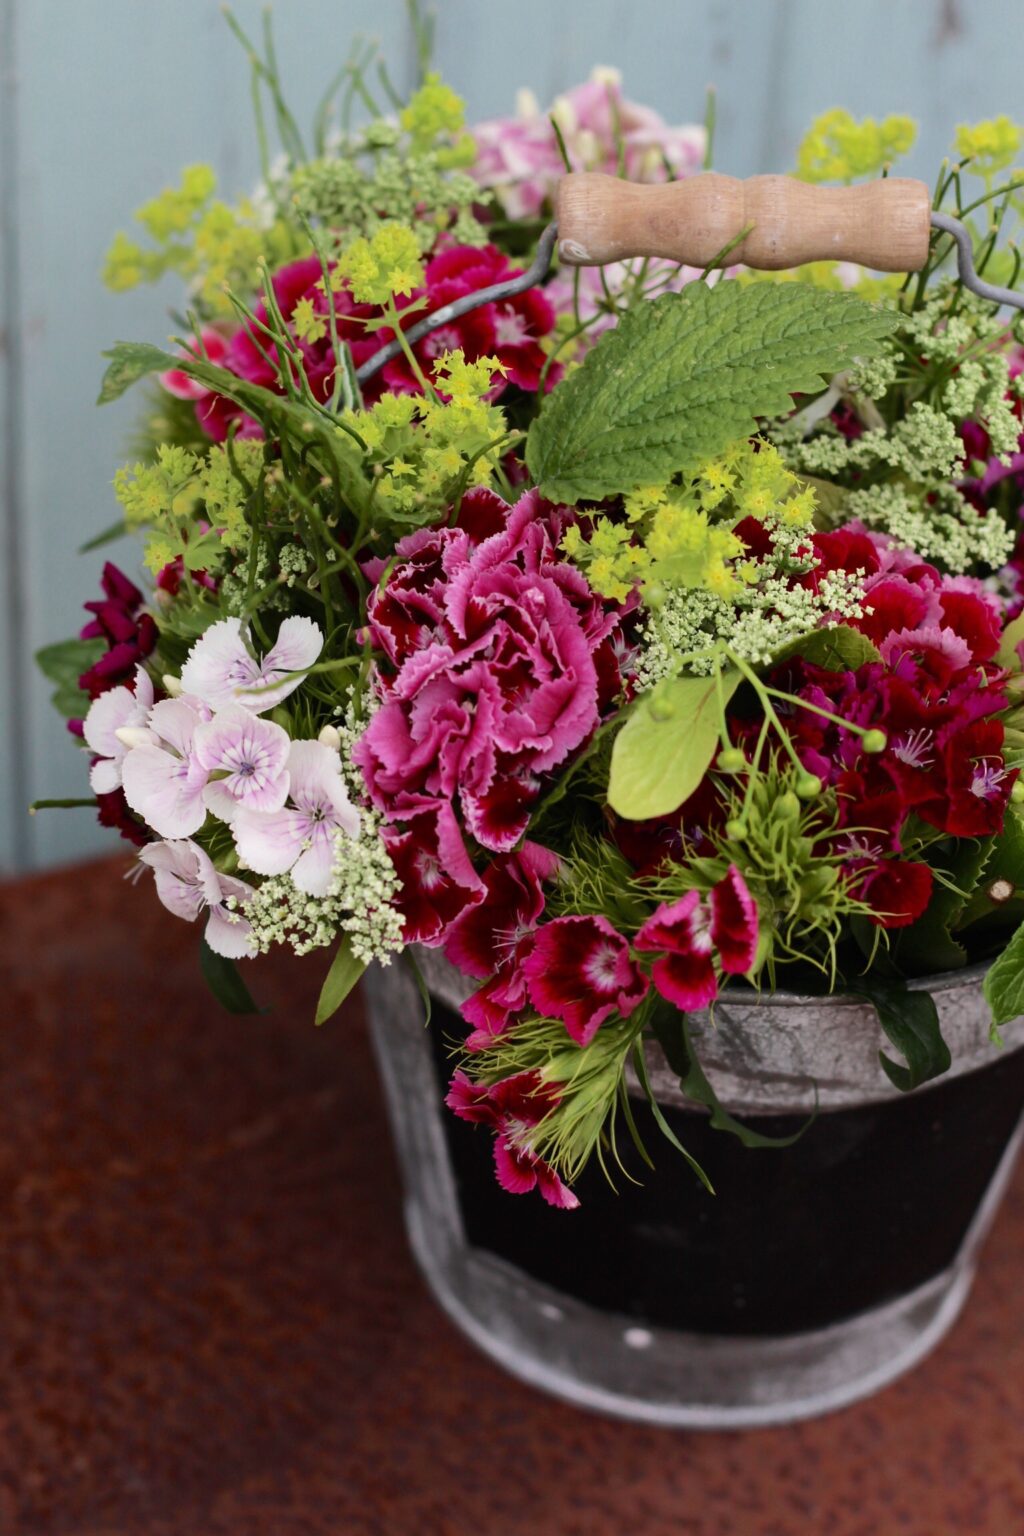 These posies of scented sweet william in a range of rich pinks, are brightened with the vivid greens of lady's mantle and delicously perfumed lemon balm leaf. Photo: Tuckshop Flowers